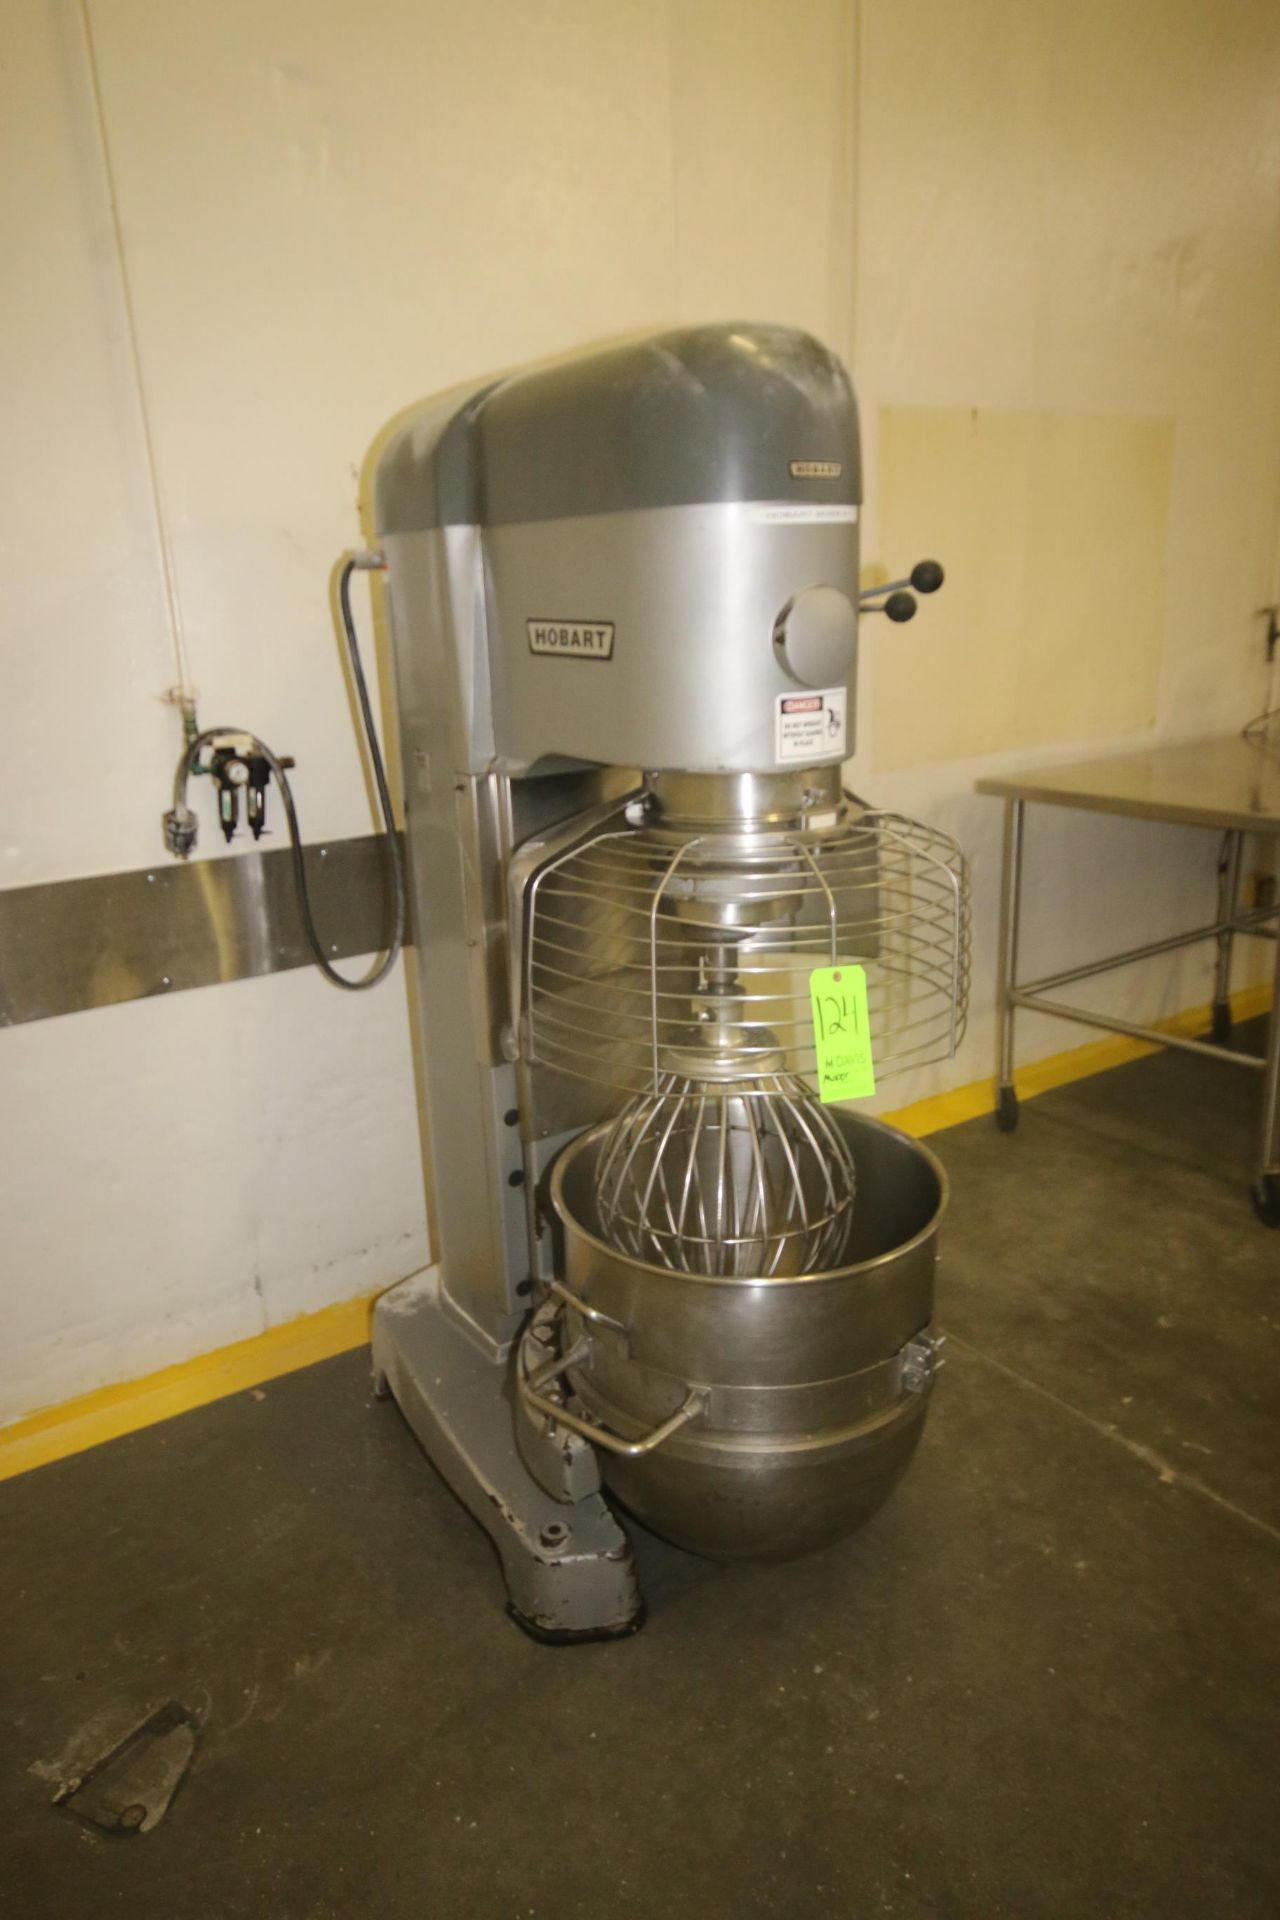 Hobart Mixer, M/N V1401, S/N 31-1310-109, with 5 hp Motor, 1750 RPM, 200 Volts, 3 Phase, with S/S